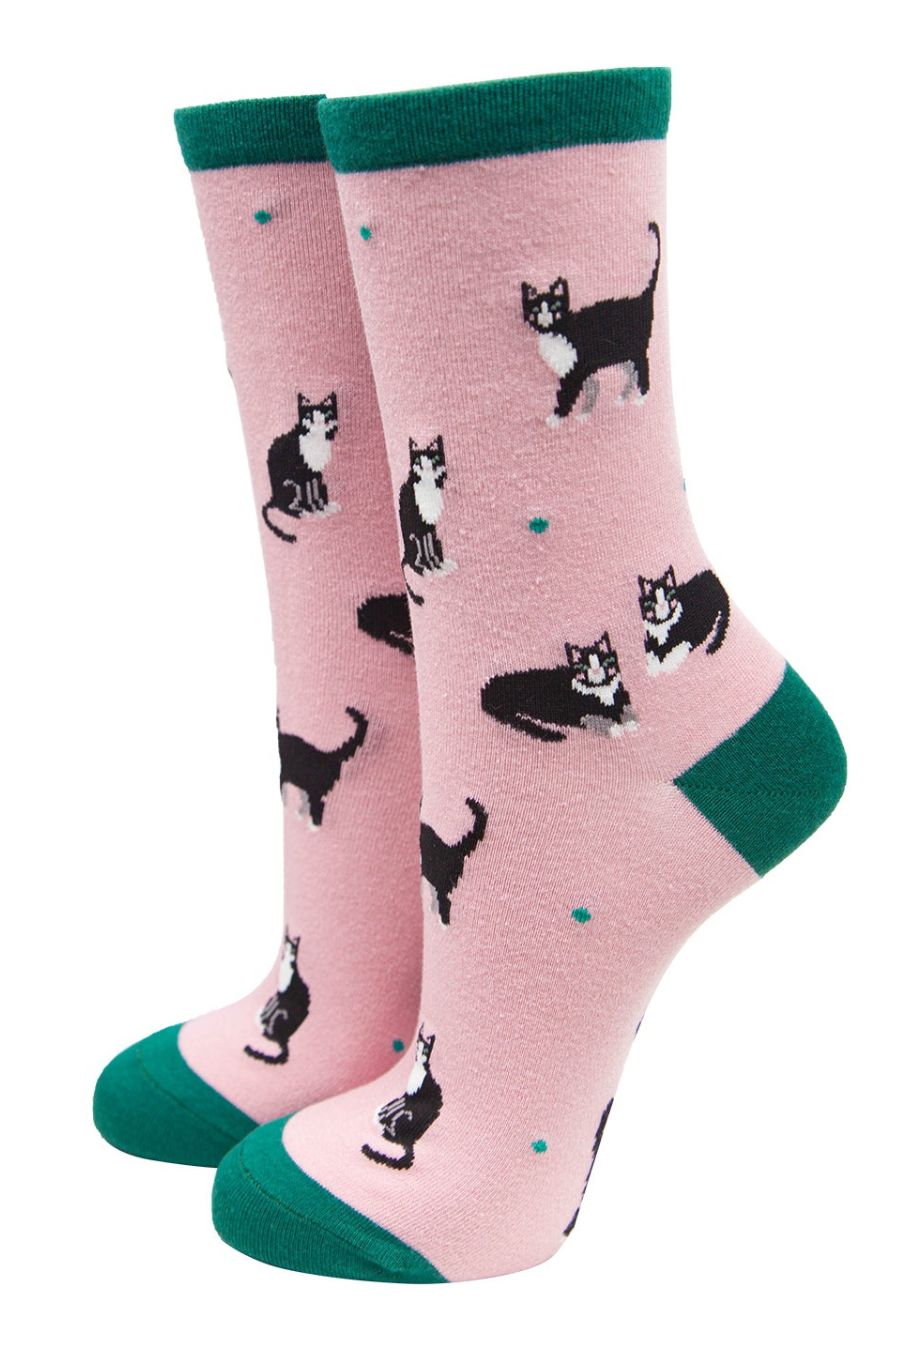 pink and green ankle socks with black cats on them